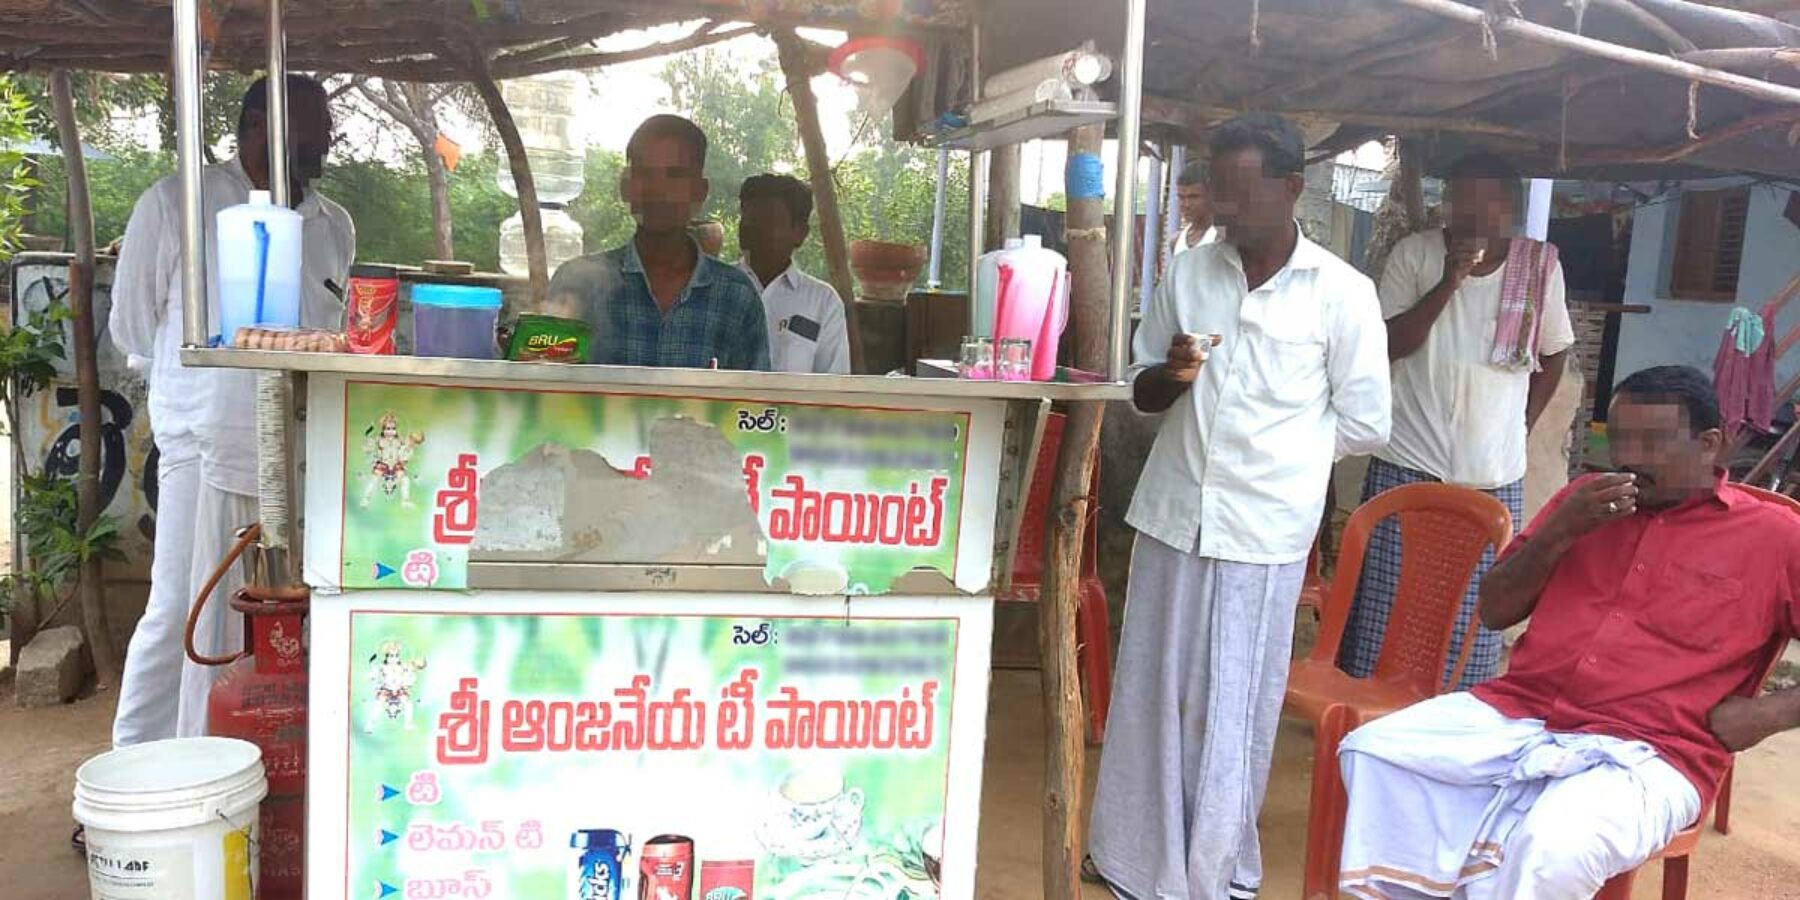 A Widow’s Son with a Tea Cart is Bringing Jesus to an Unreached Village